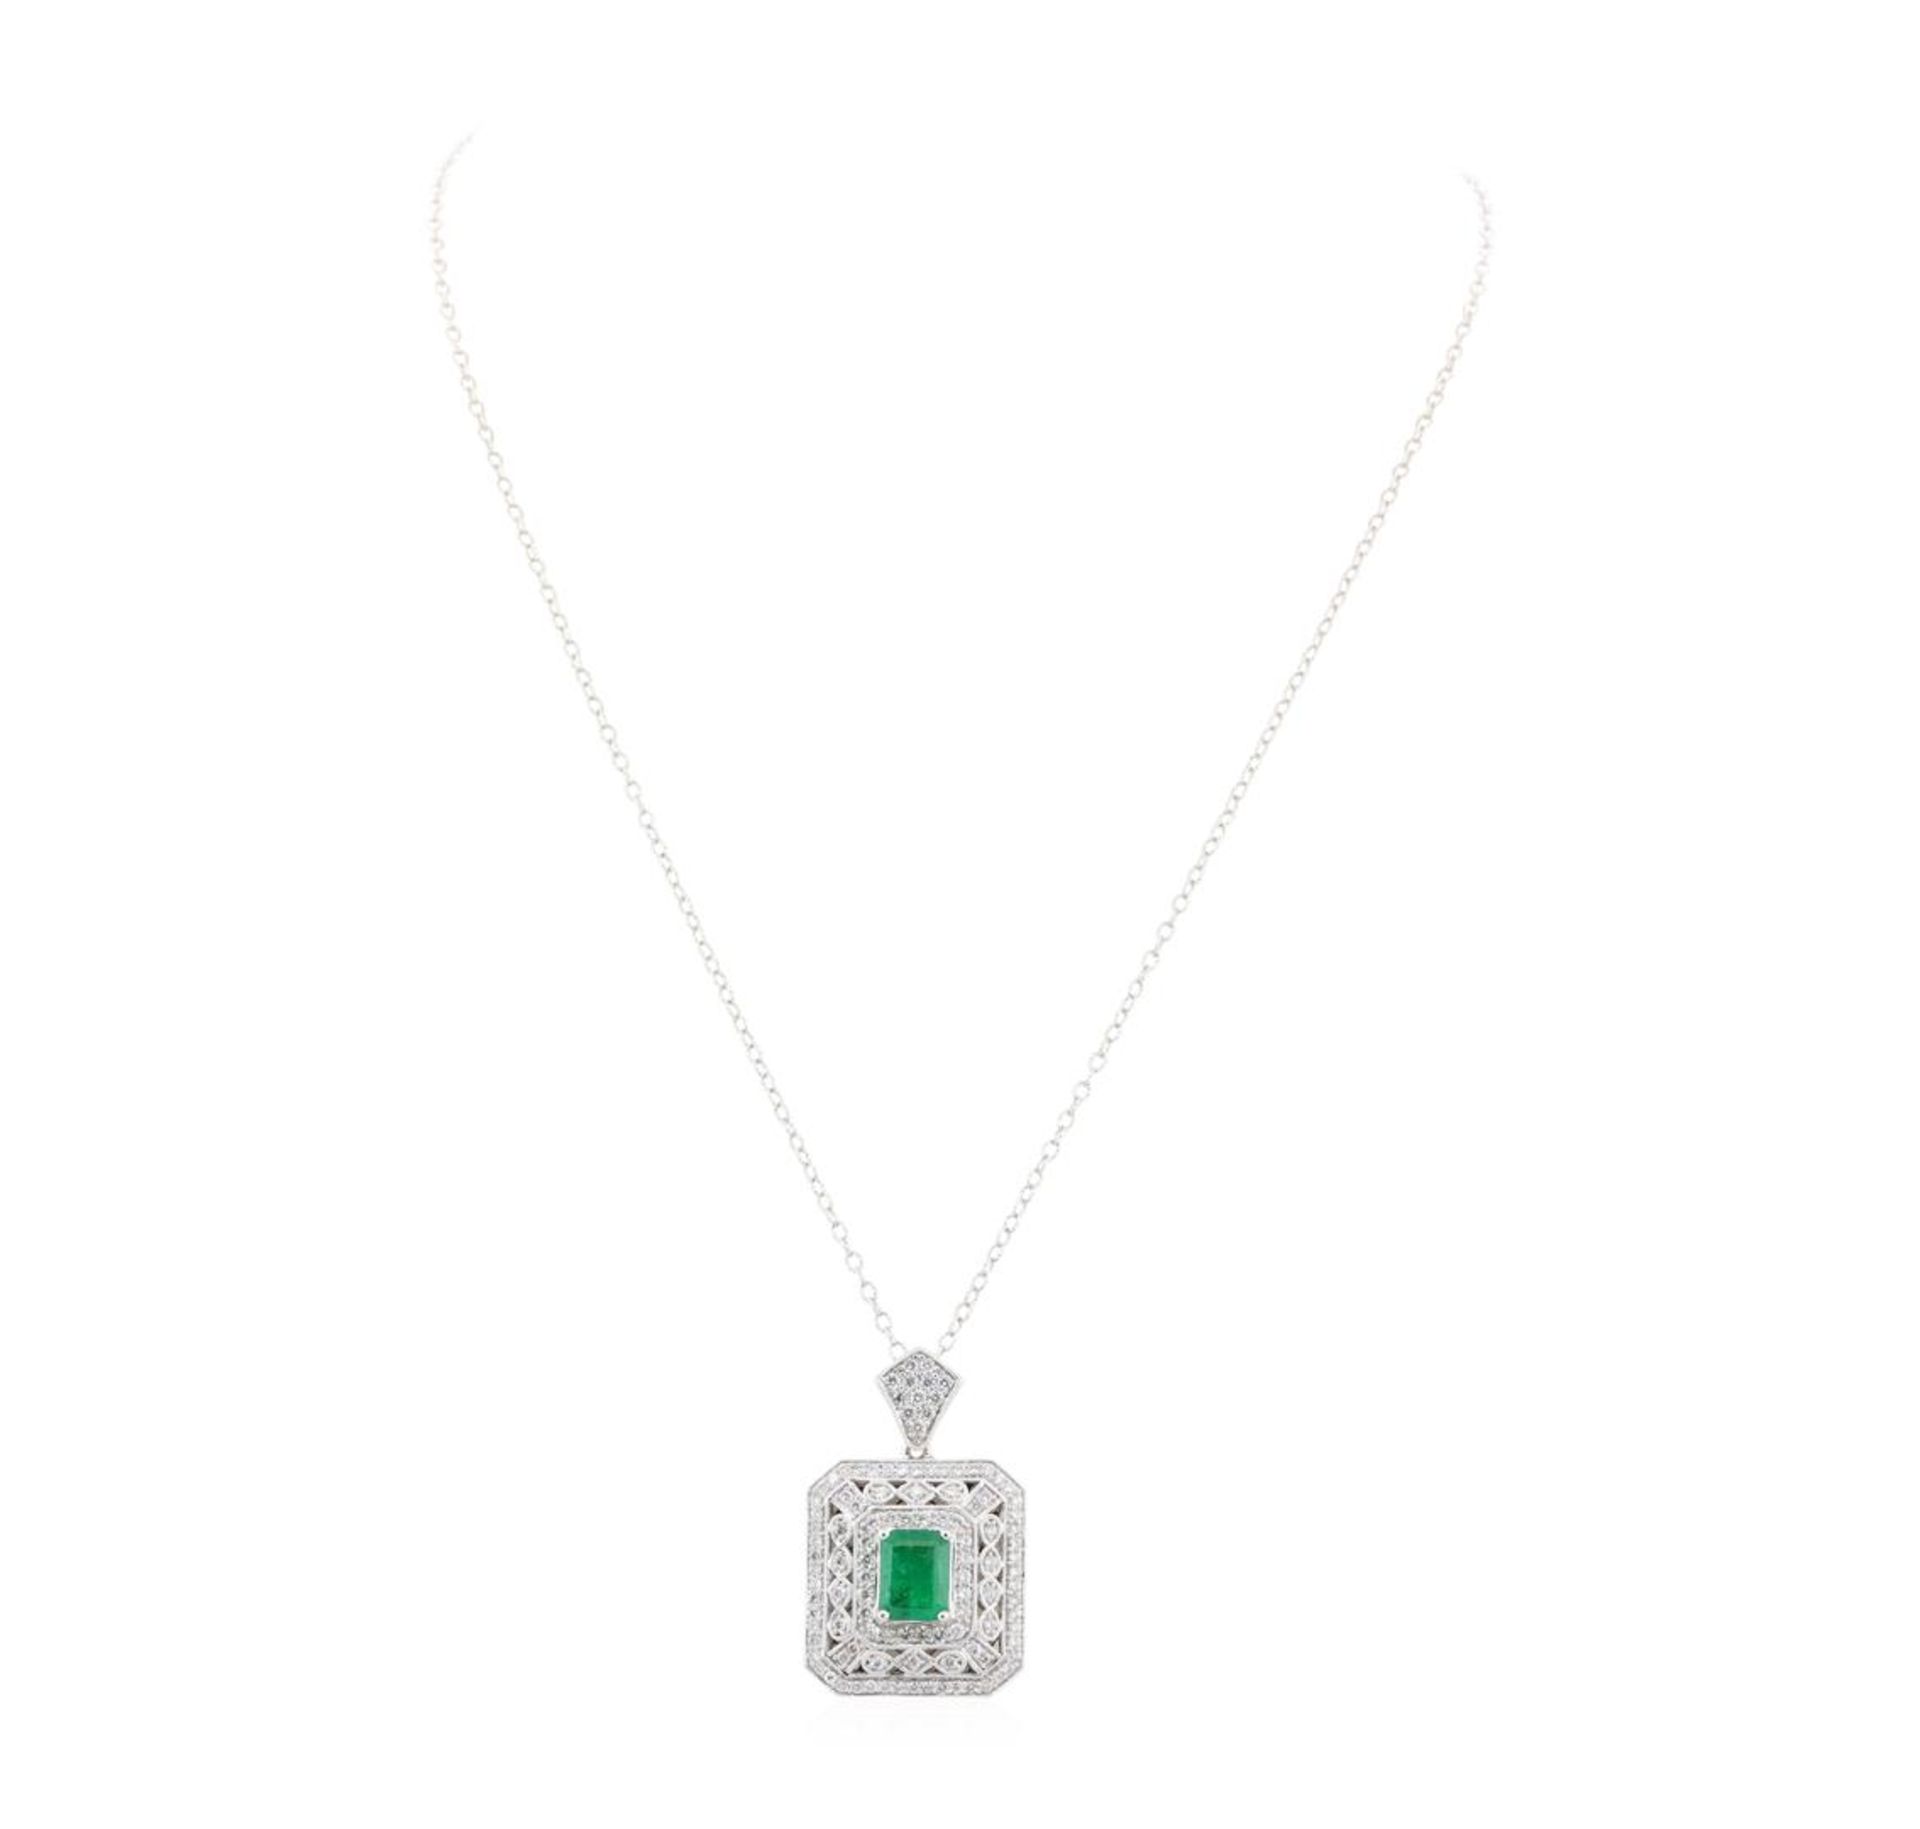 2.85ctw Emerald and Diamond Pendant With Chain - 18KT White Gold